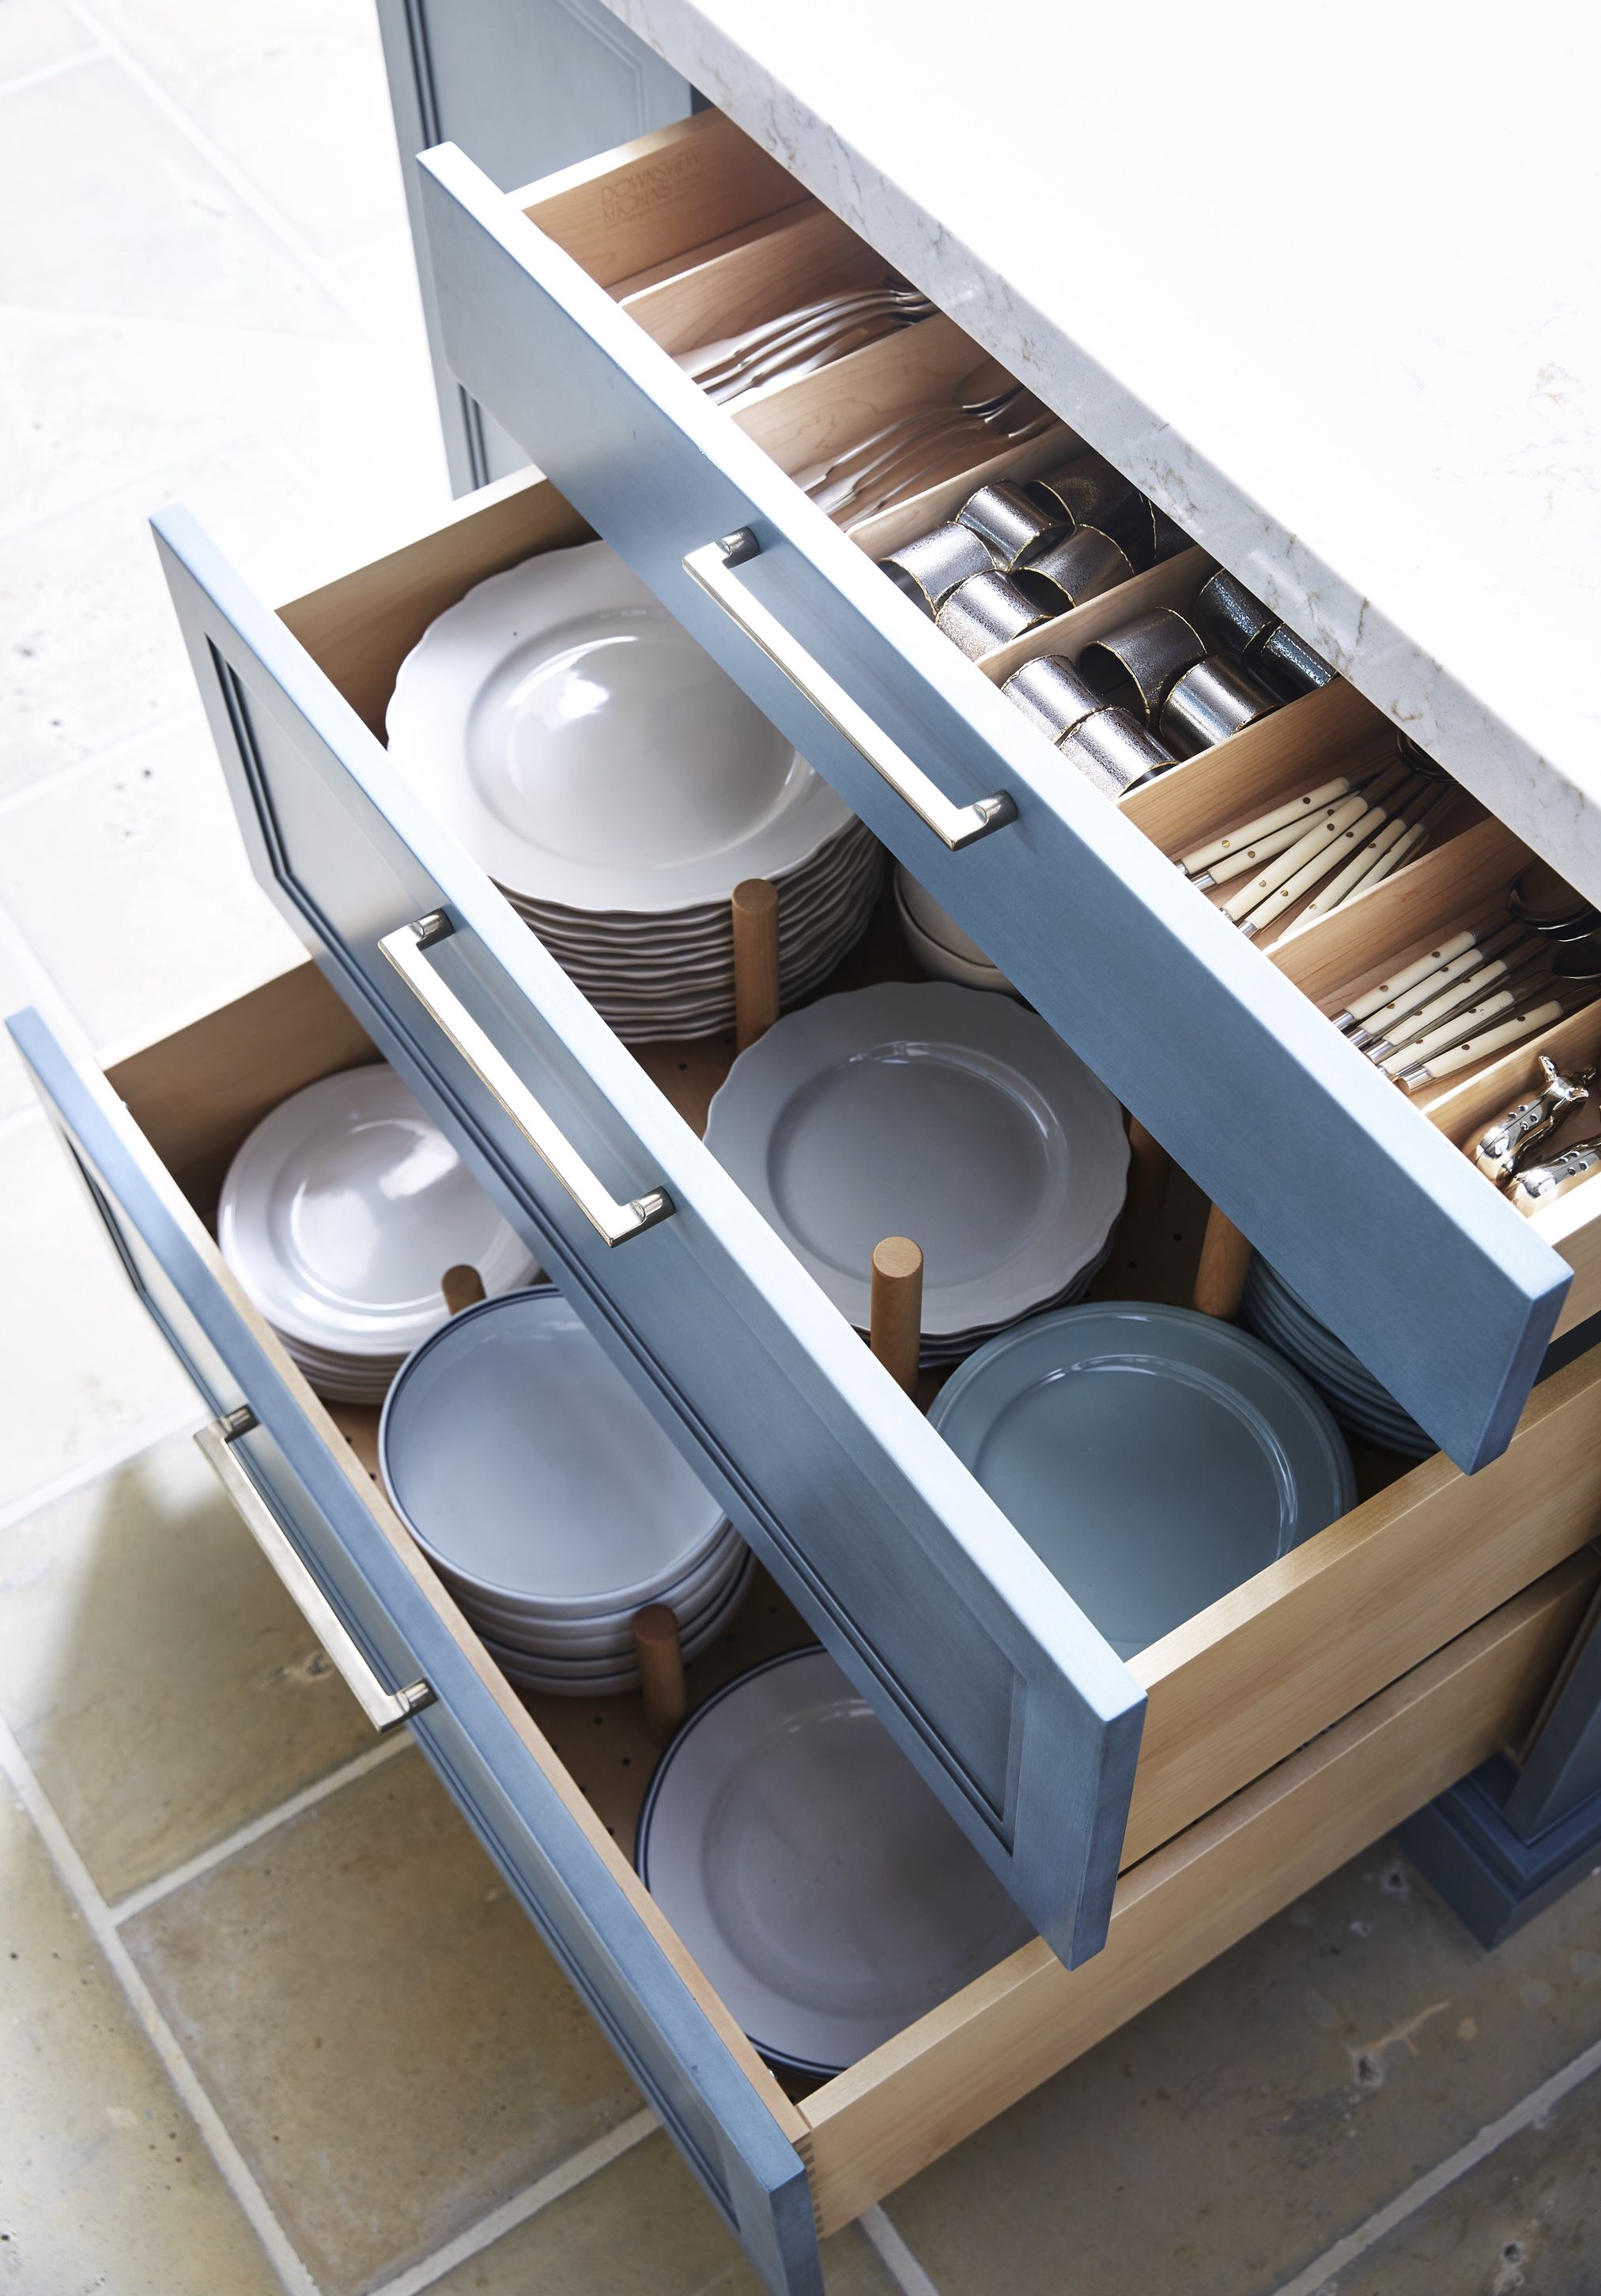 Why A Kitchen Drawer Might Make More Sense For Snack Storage Than